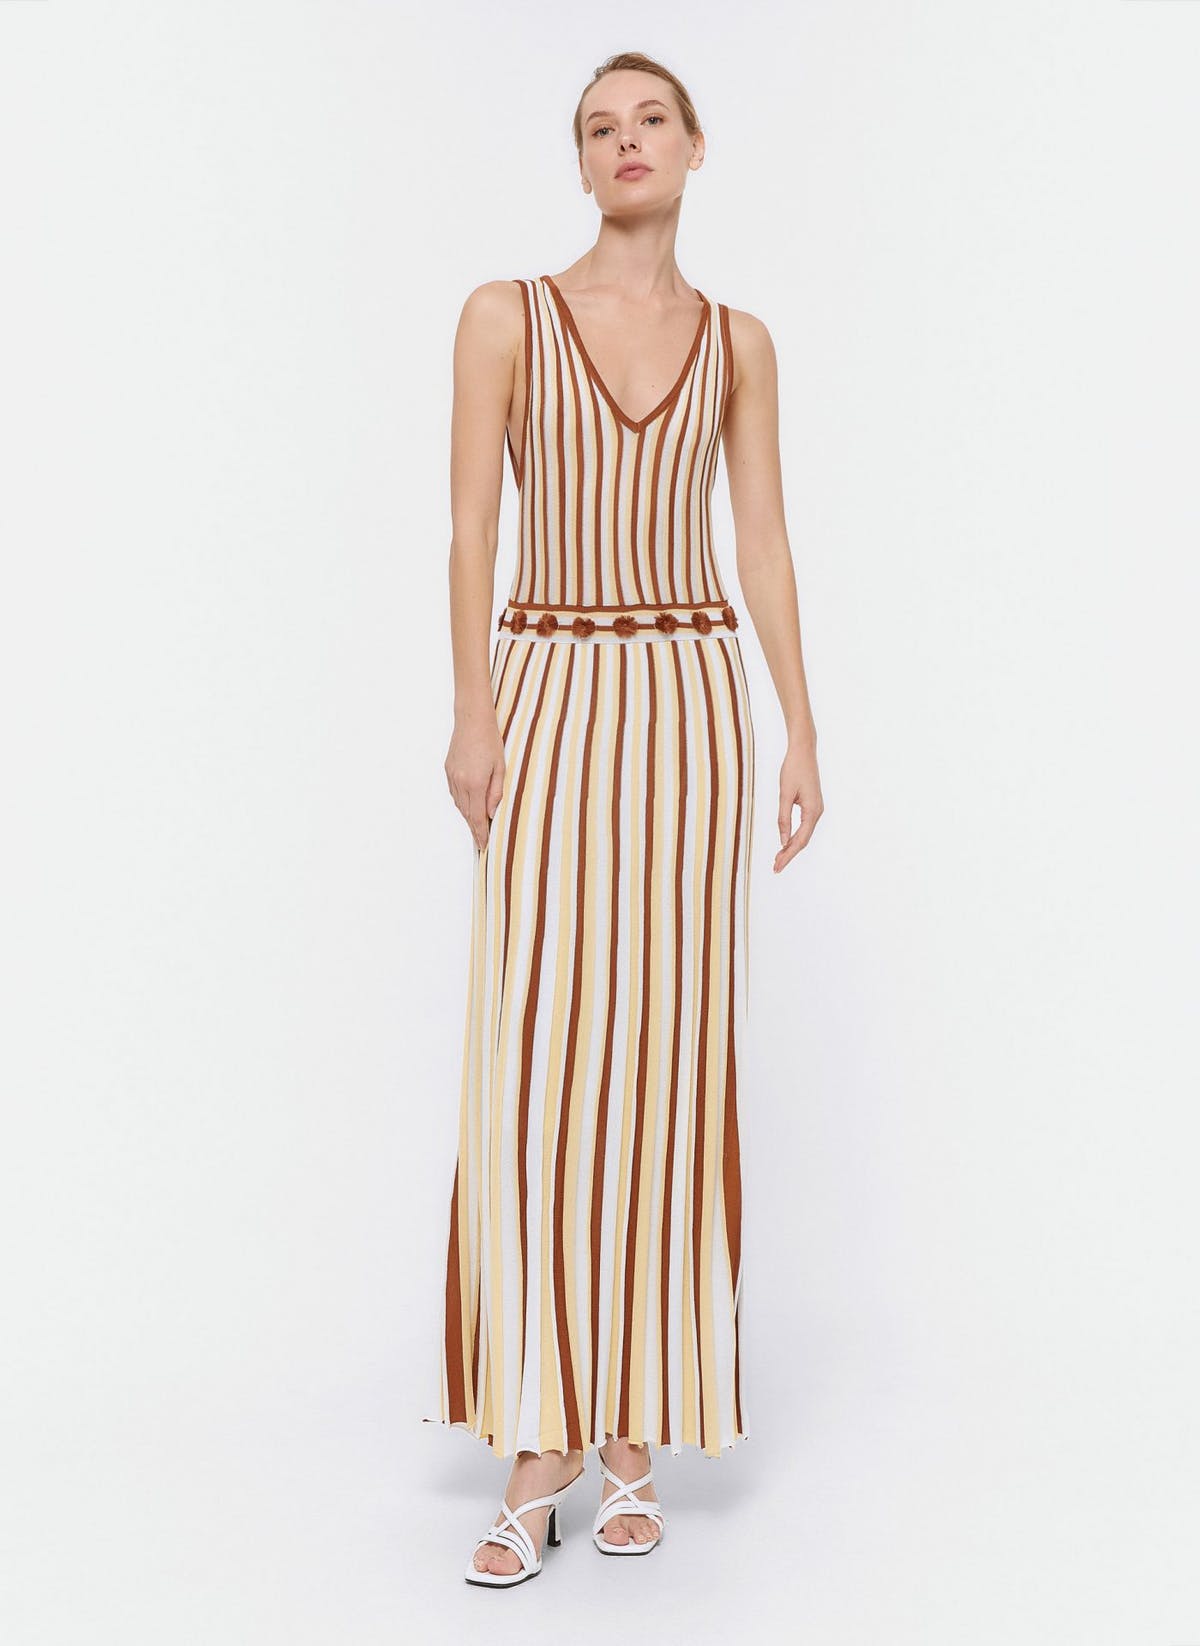 Striped dresses will effortlessly update your wardrobe in time for